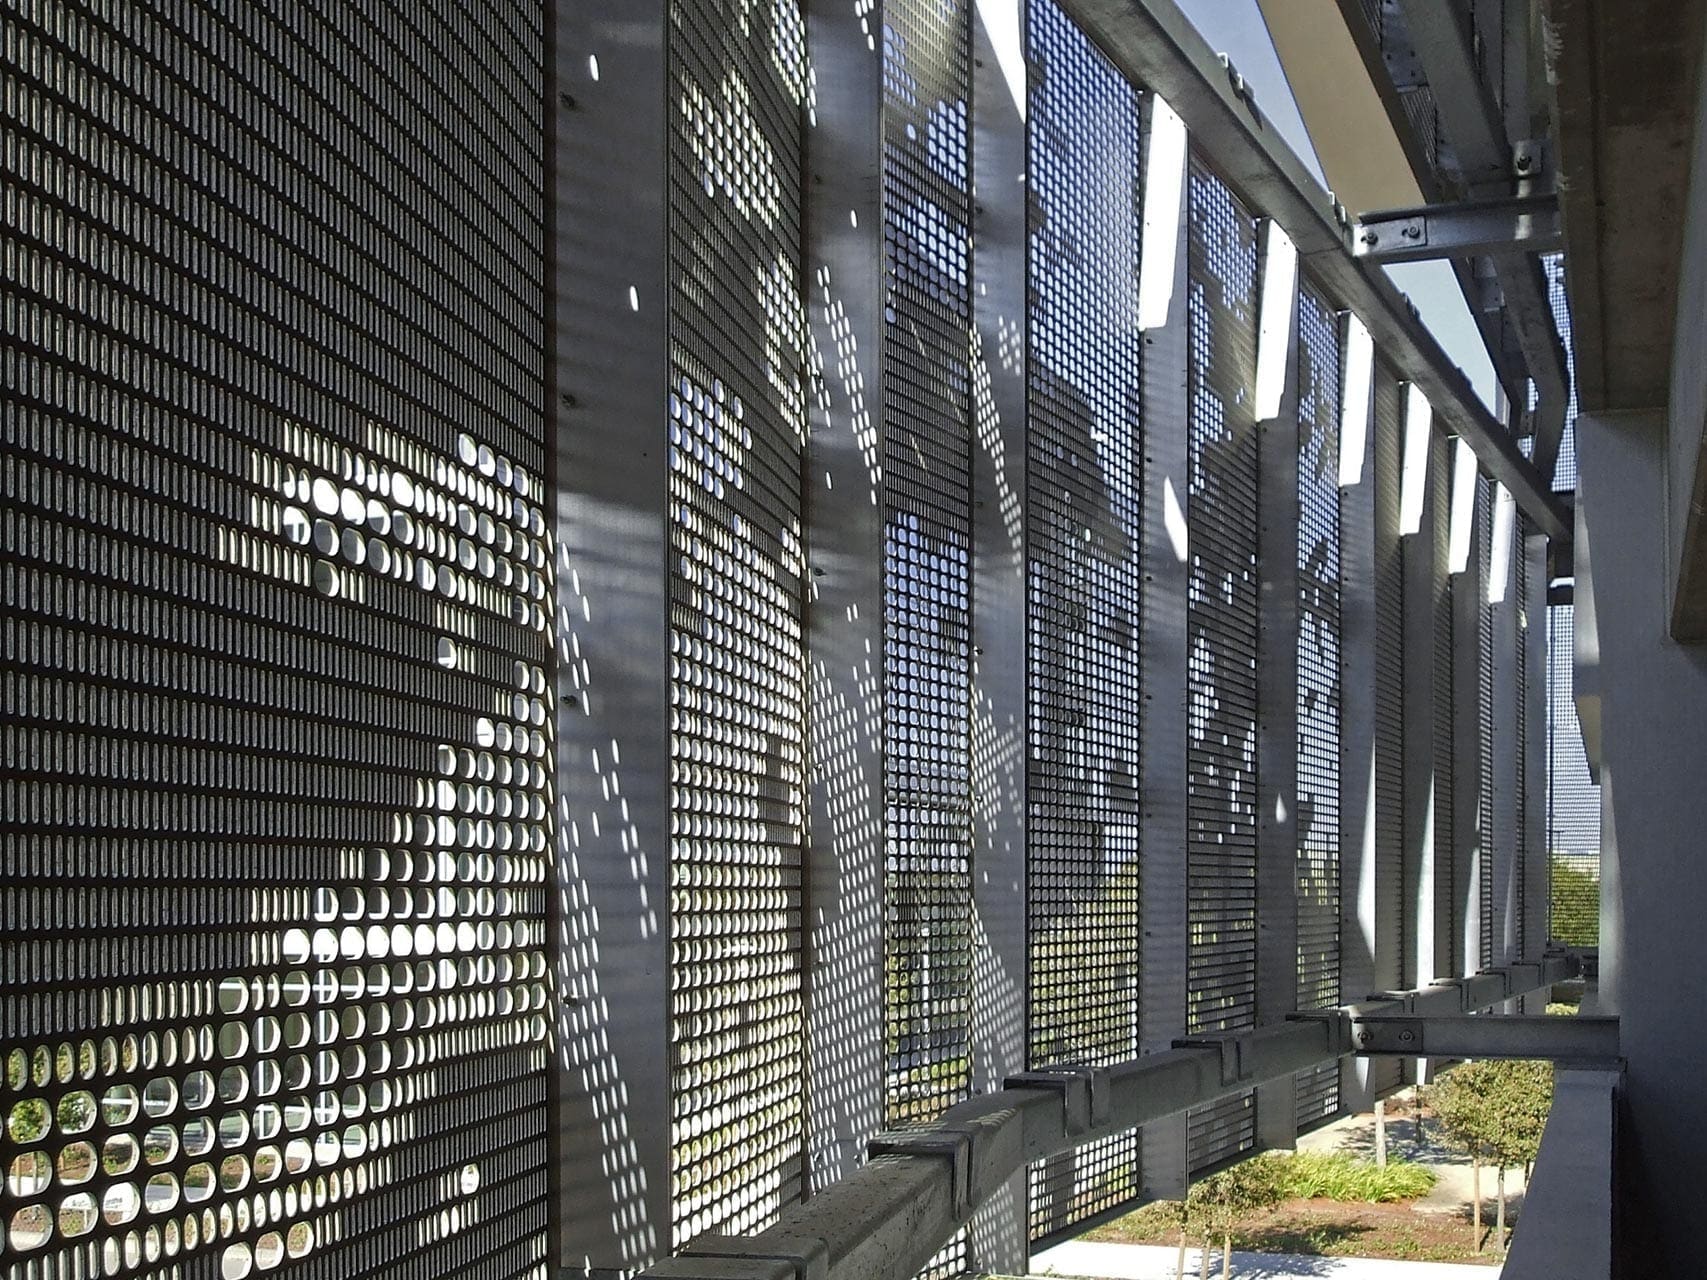 Detail of the undulating facade design by WRNS Studio with custom oval perforation design.